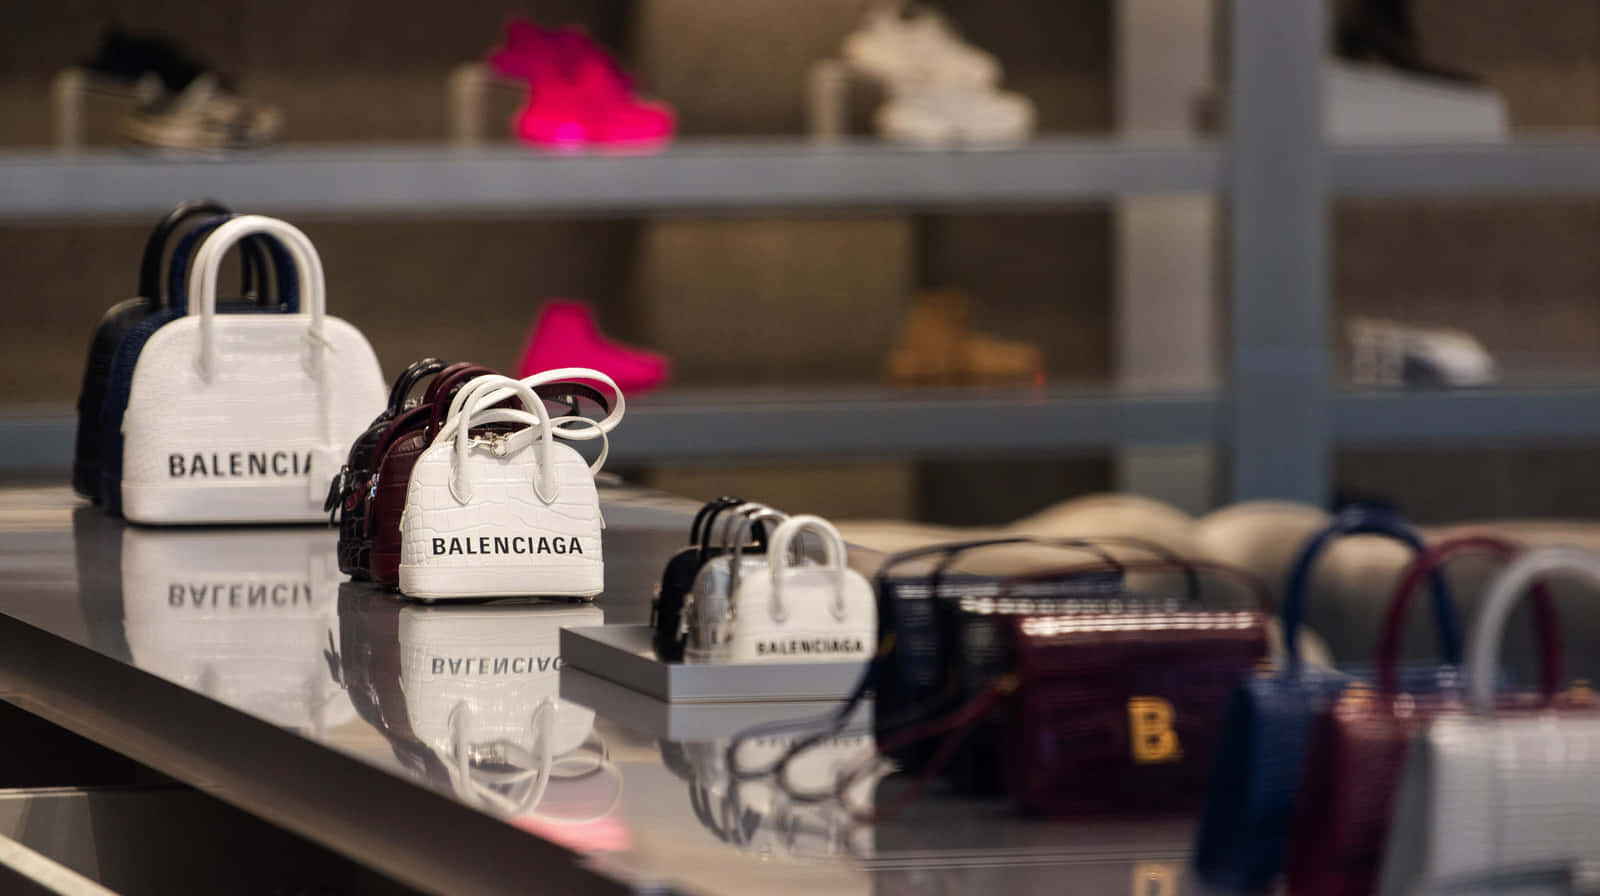 Step up your style with the latest Balenciaga collection